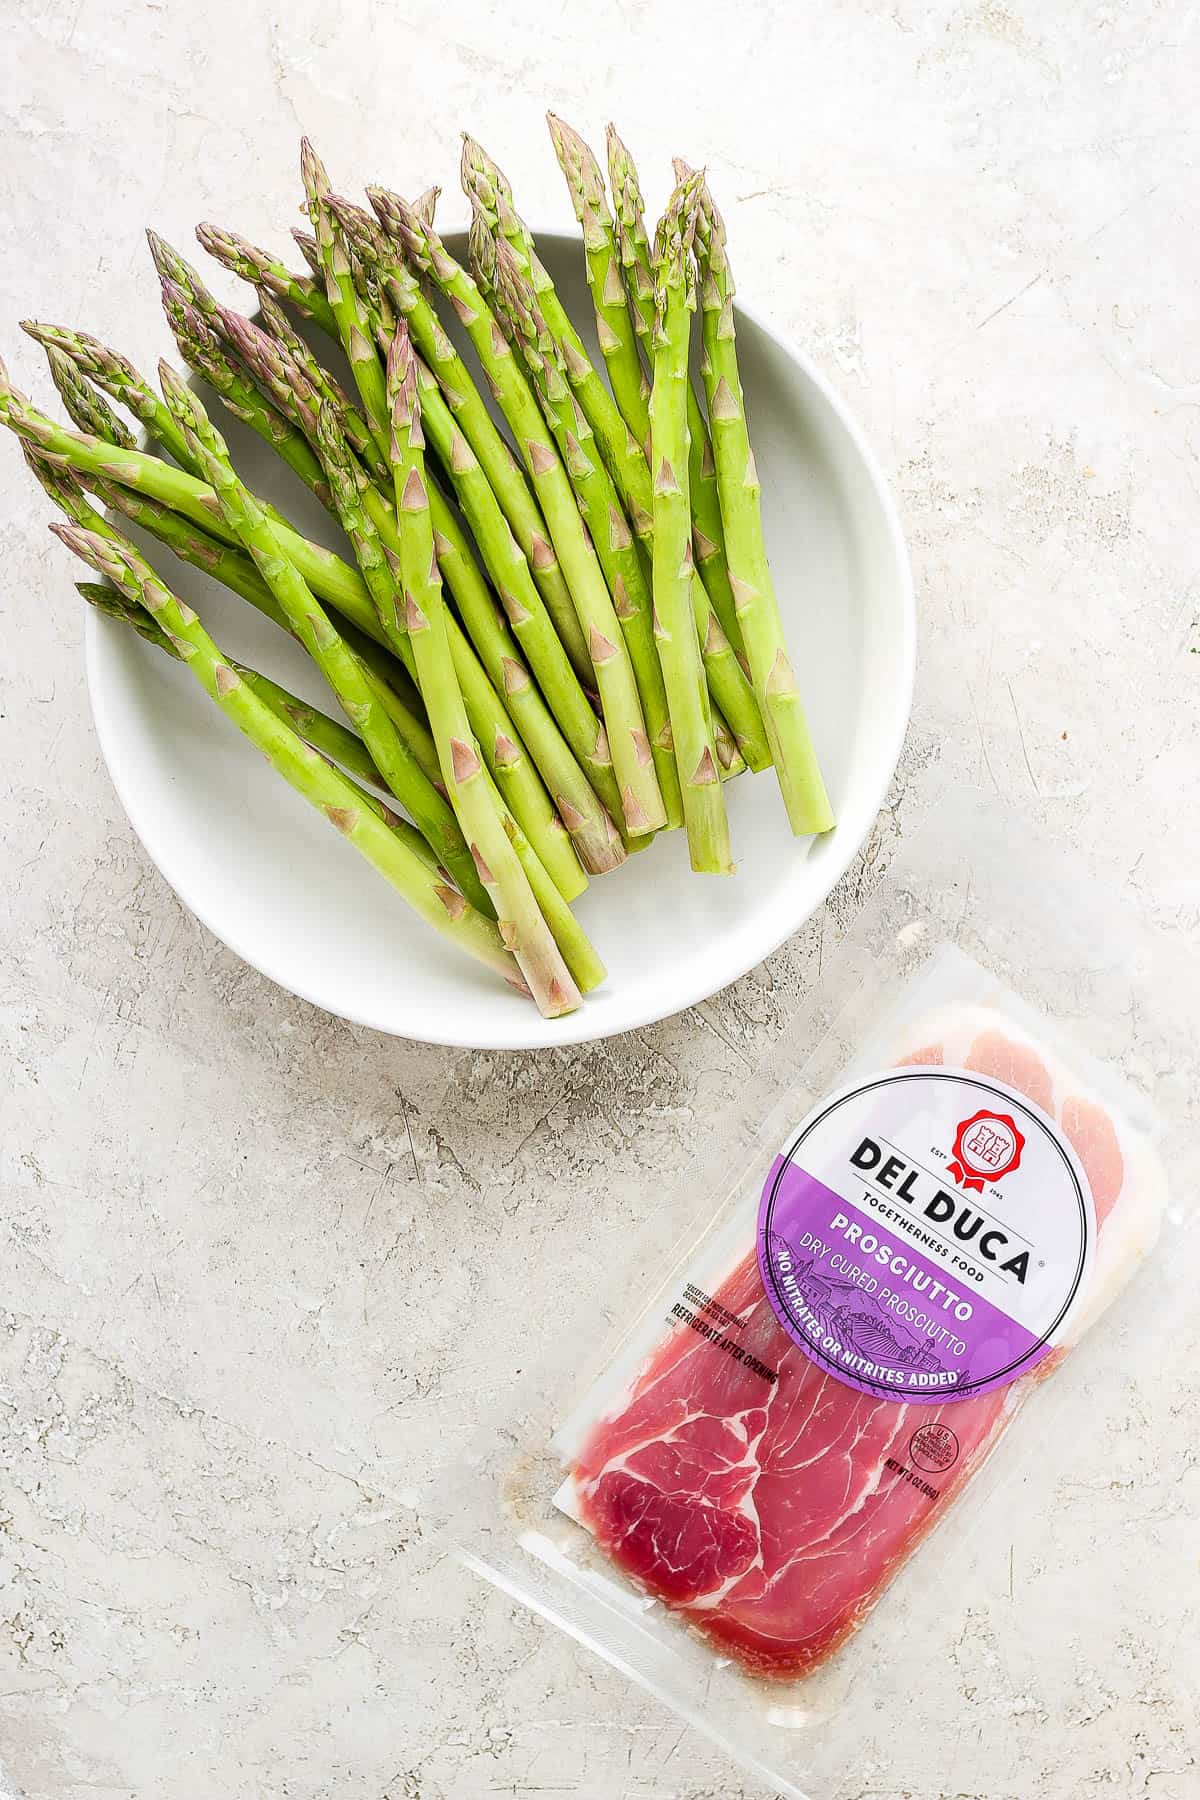 Trimmed asparagus in a white bowl next to a package of prosciutto.